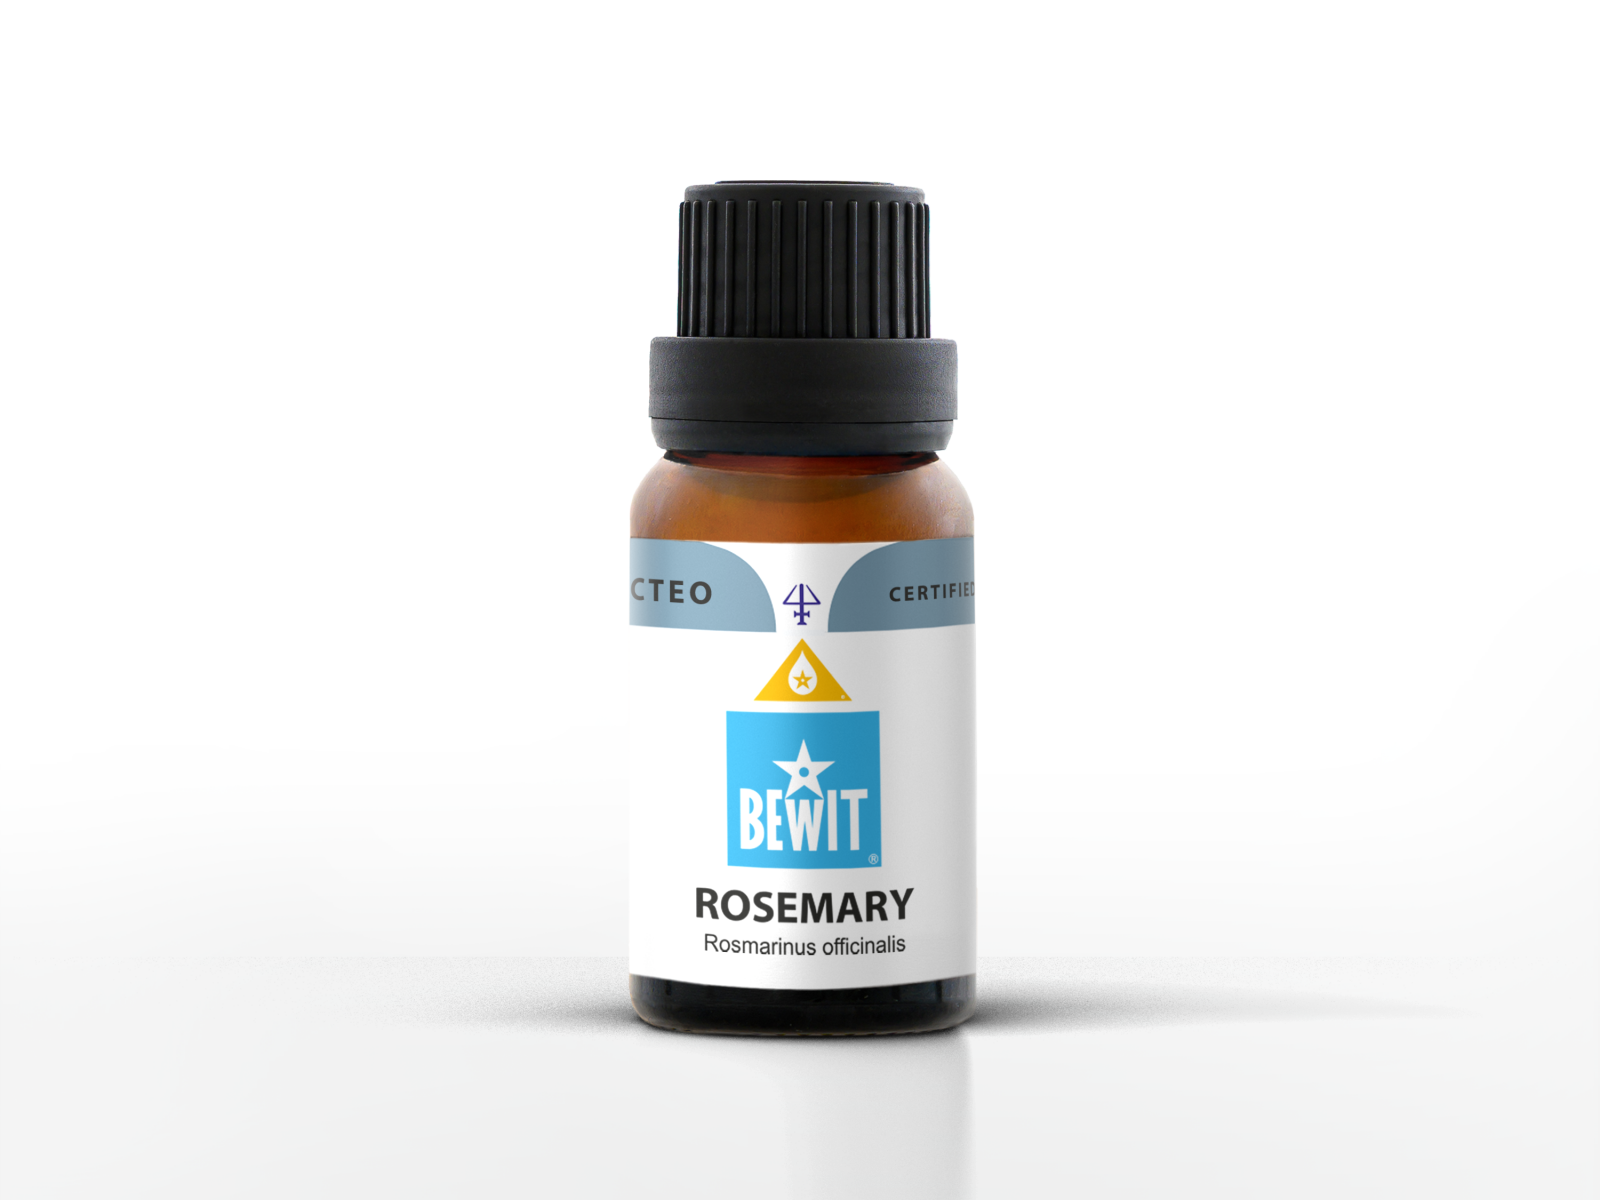 Rosemary - It is a 100% pure essential oil - 3